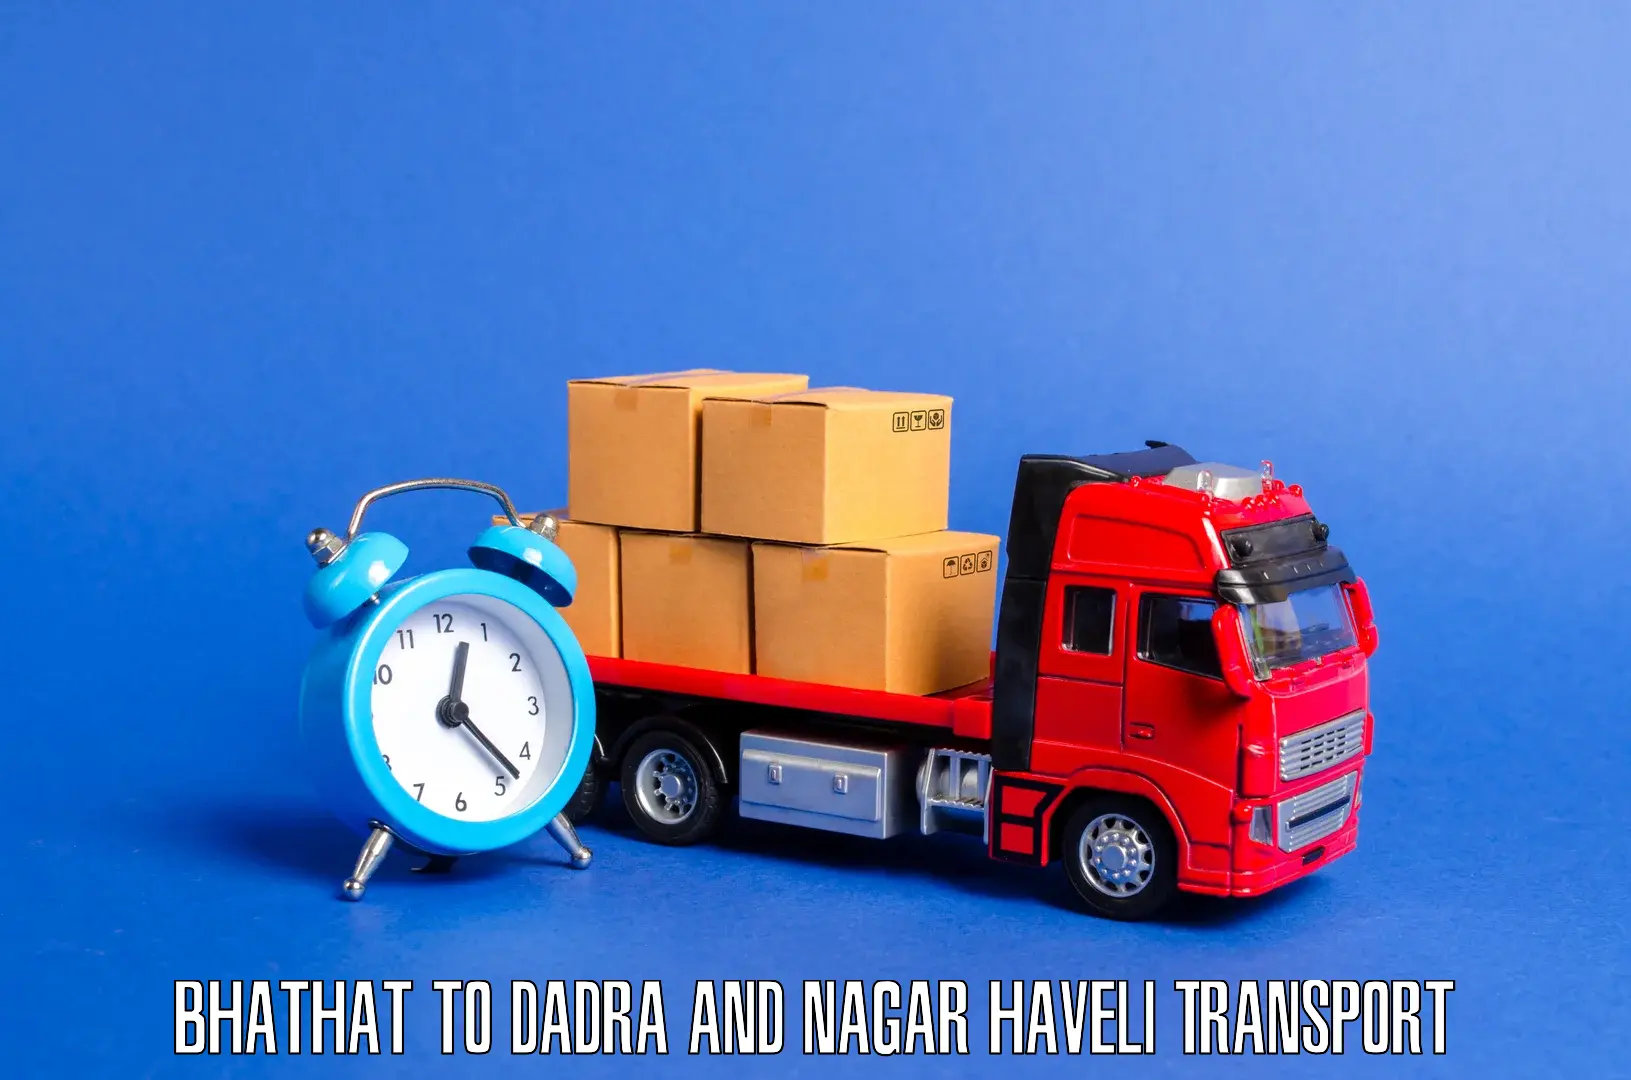 Express transport services Bhathat to Dadra and Nagar Haveli